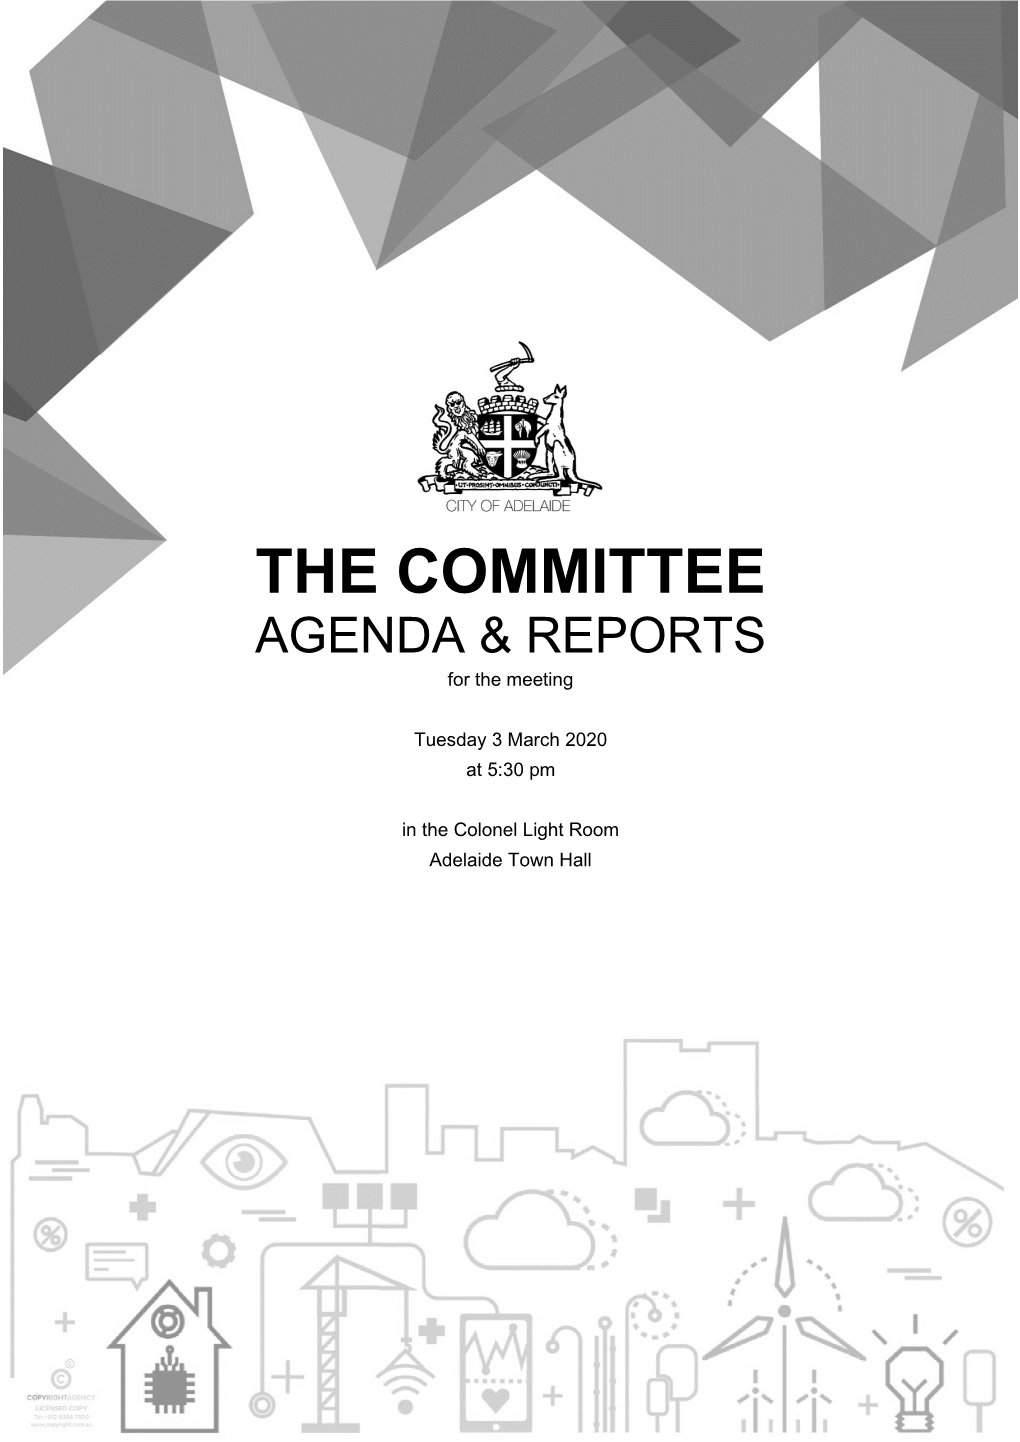 THE COMMITTEE AGENDA & REPORTS for the Meeting